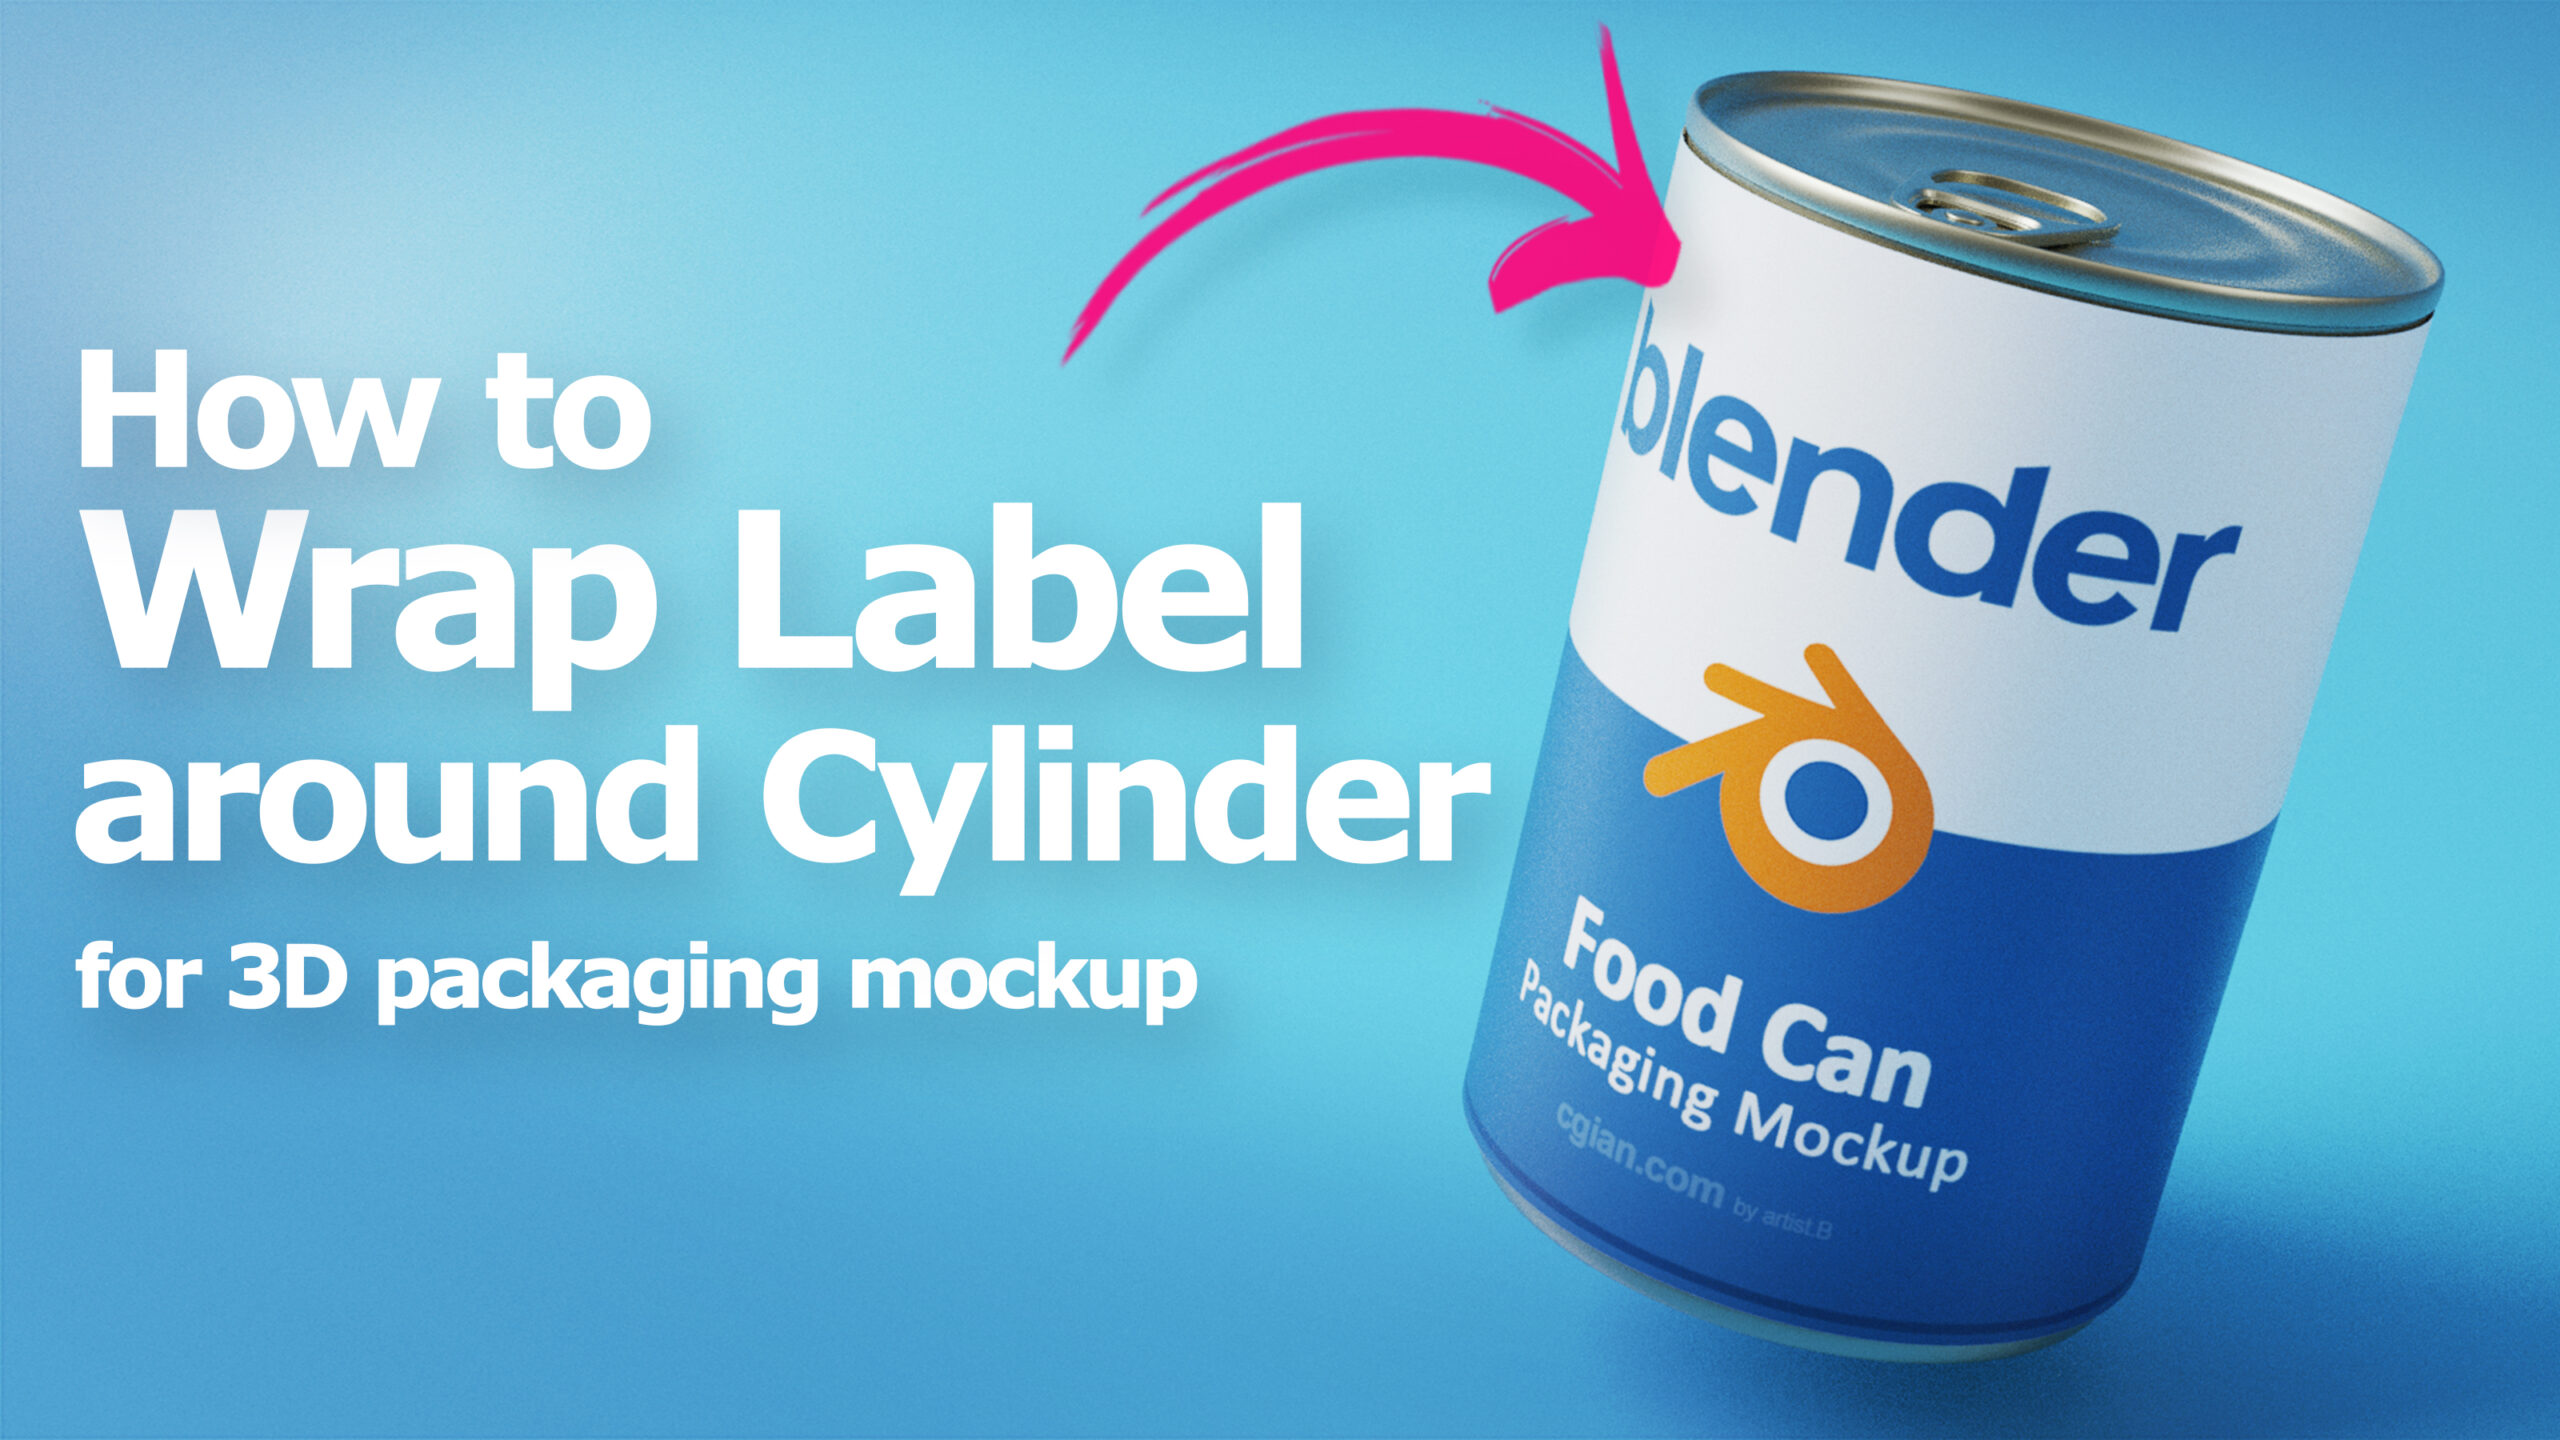 How to wrap an image around a cylinder object in Blender